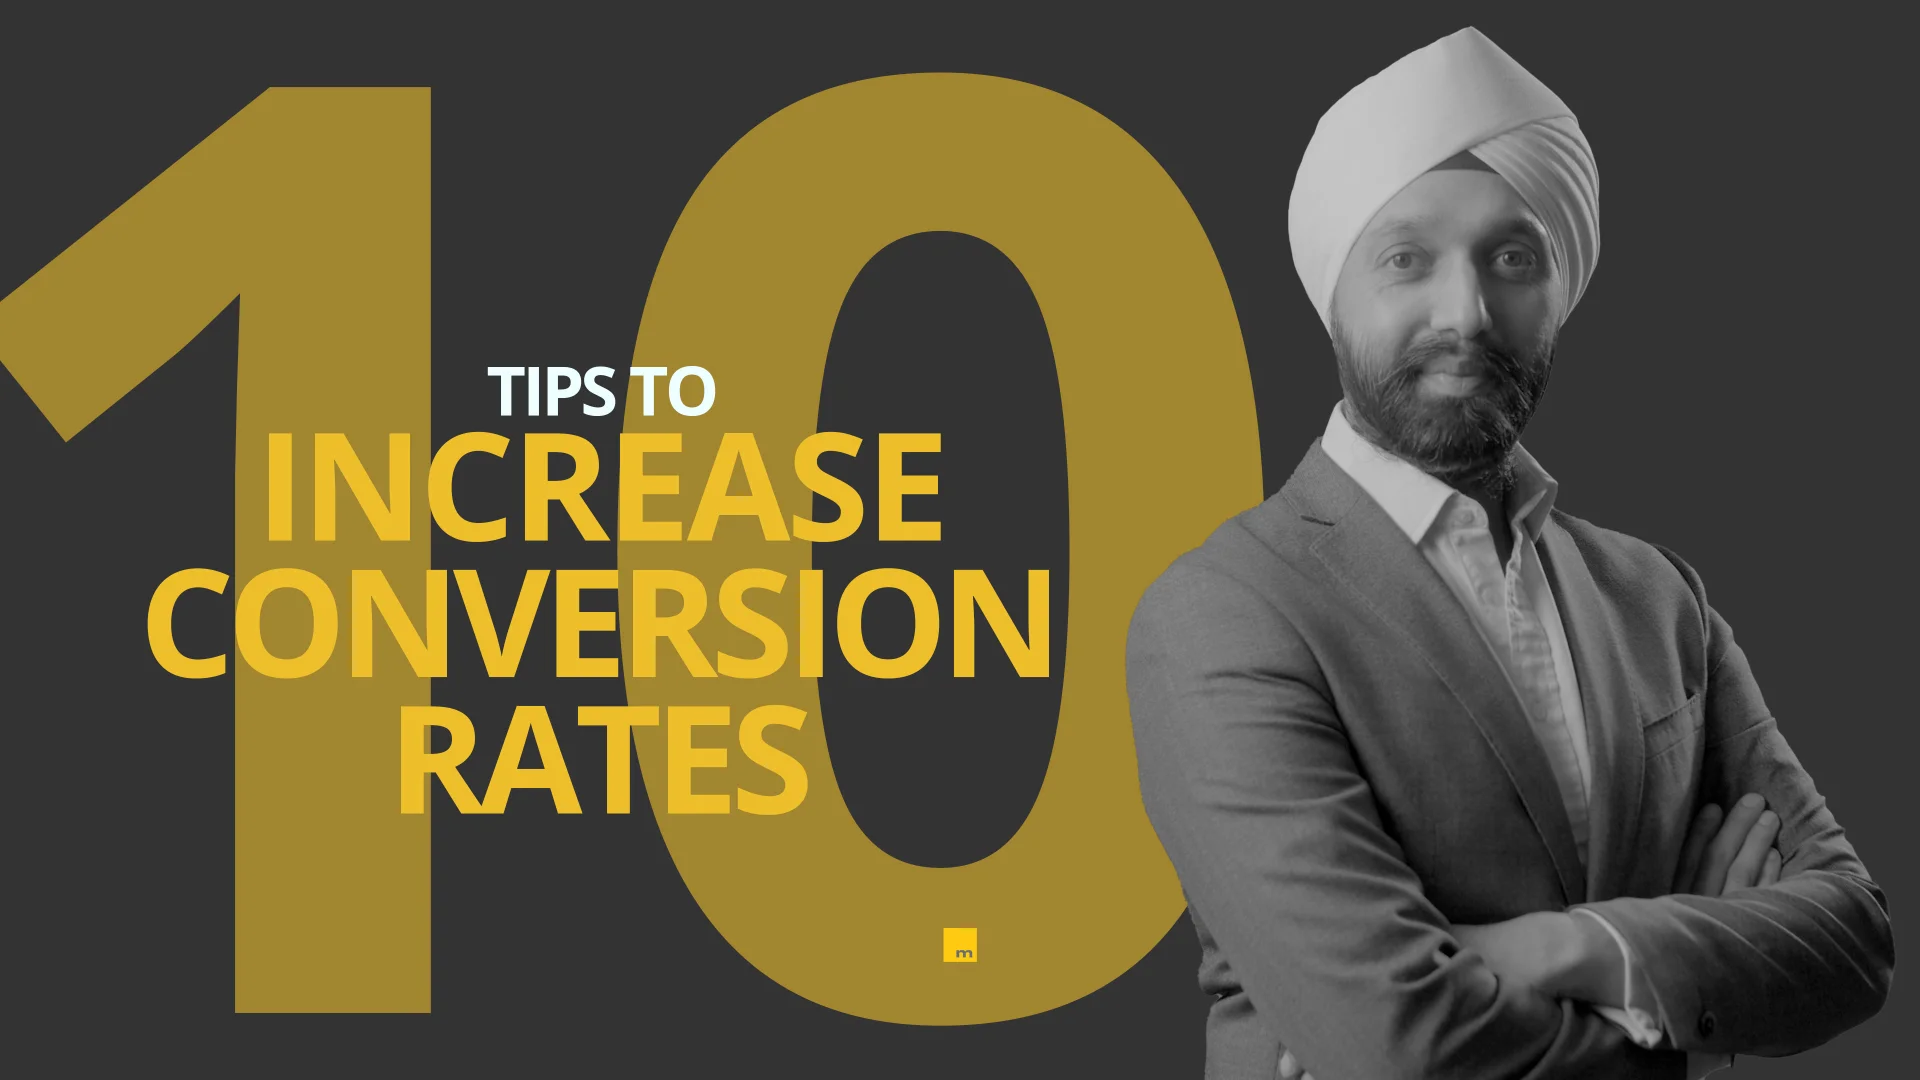 10 Effective Ways to Increase Conversion Rates with Video: Tips and Tactics for Effective Video Marketing